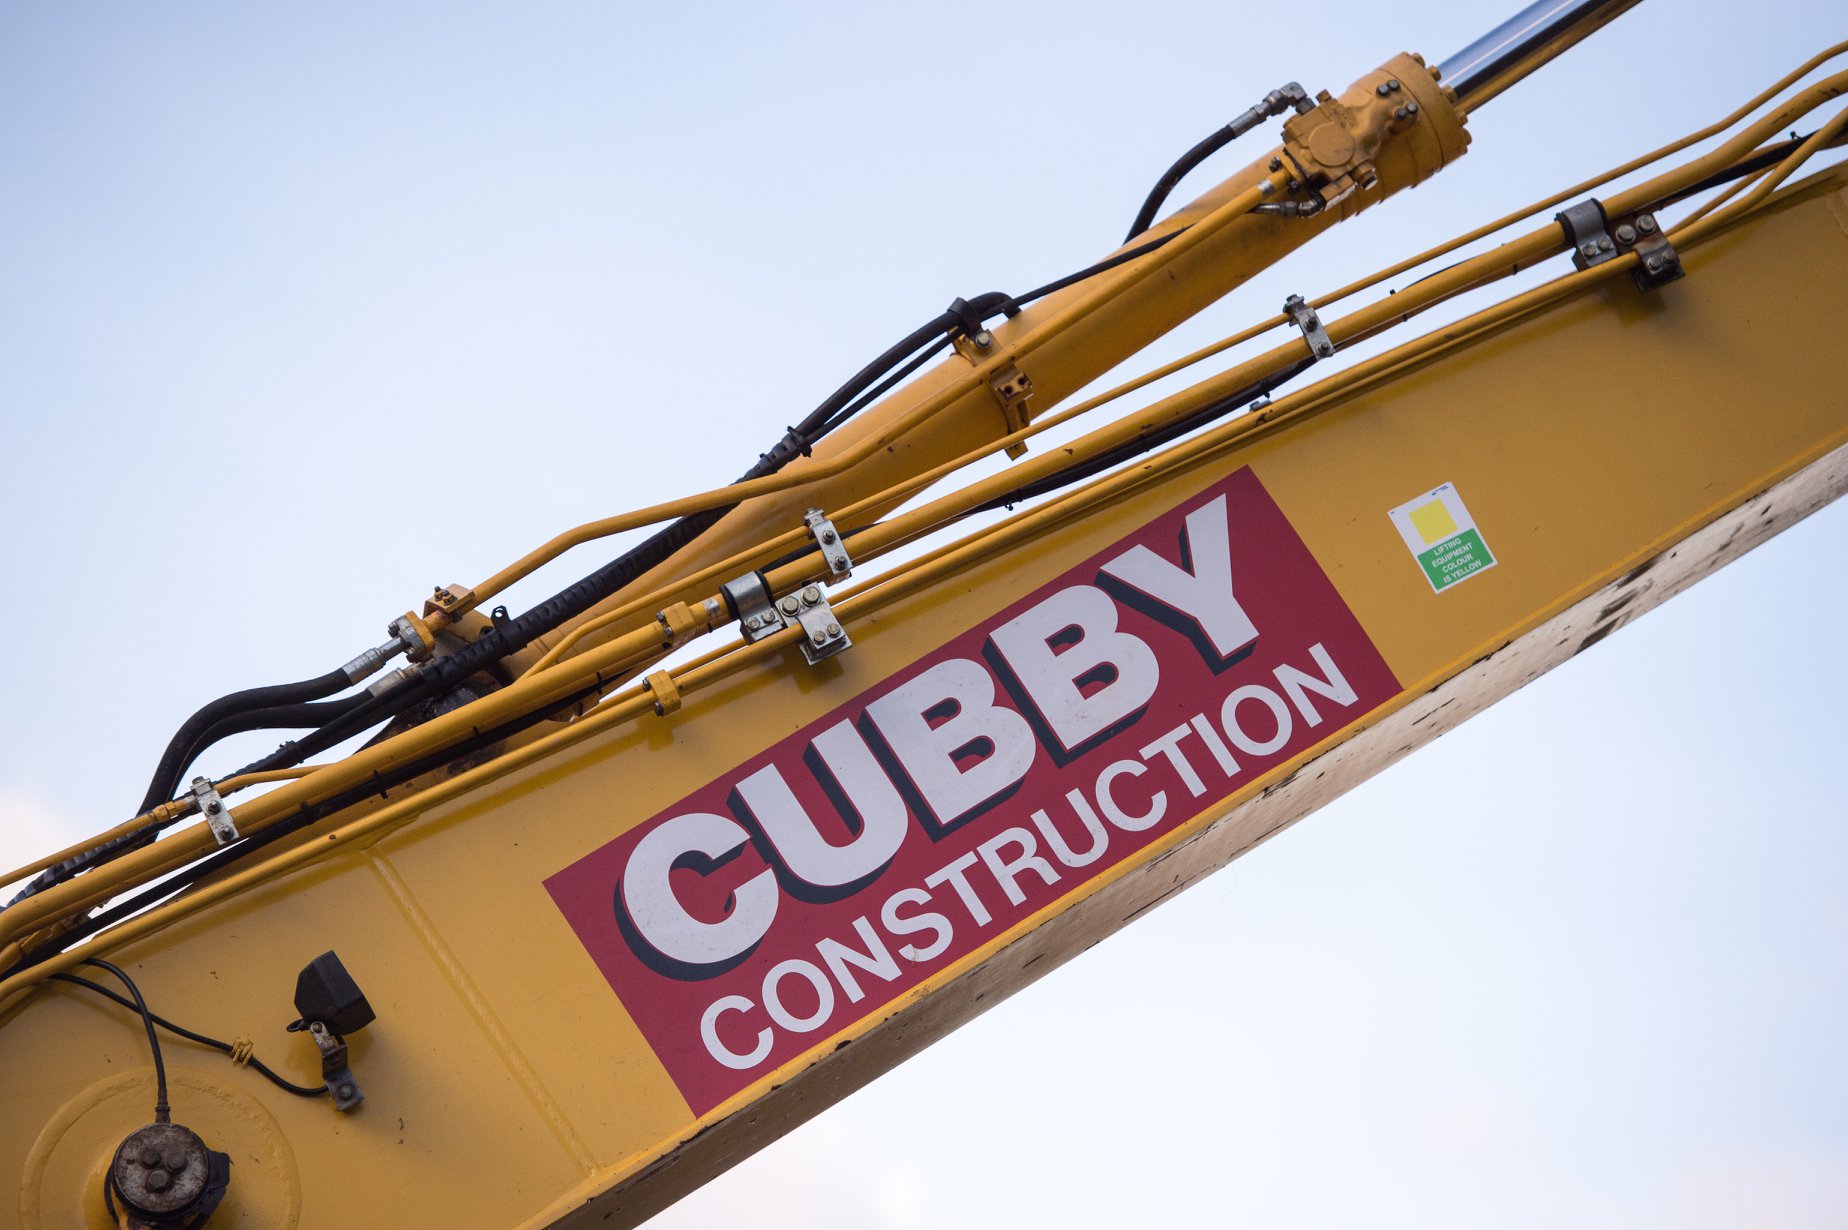 Cubby continues to develop Scottish operations with acquisition from Esh Group